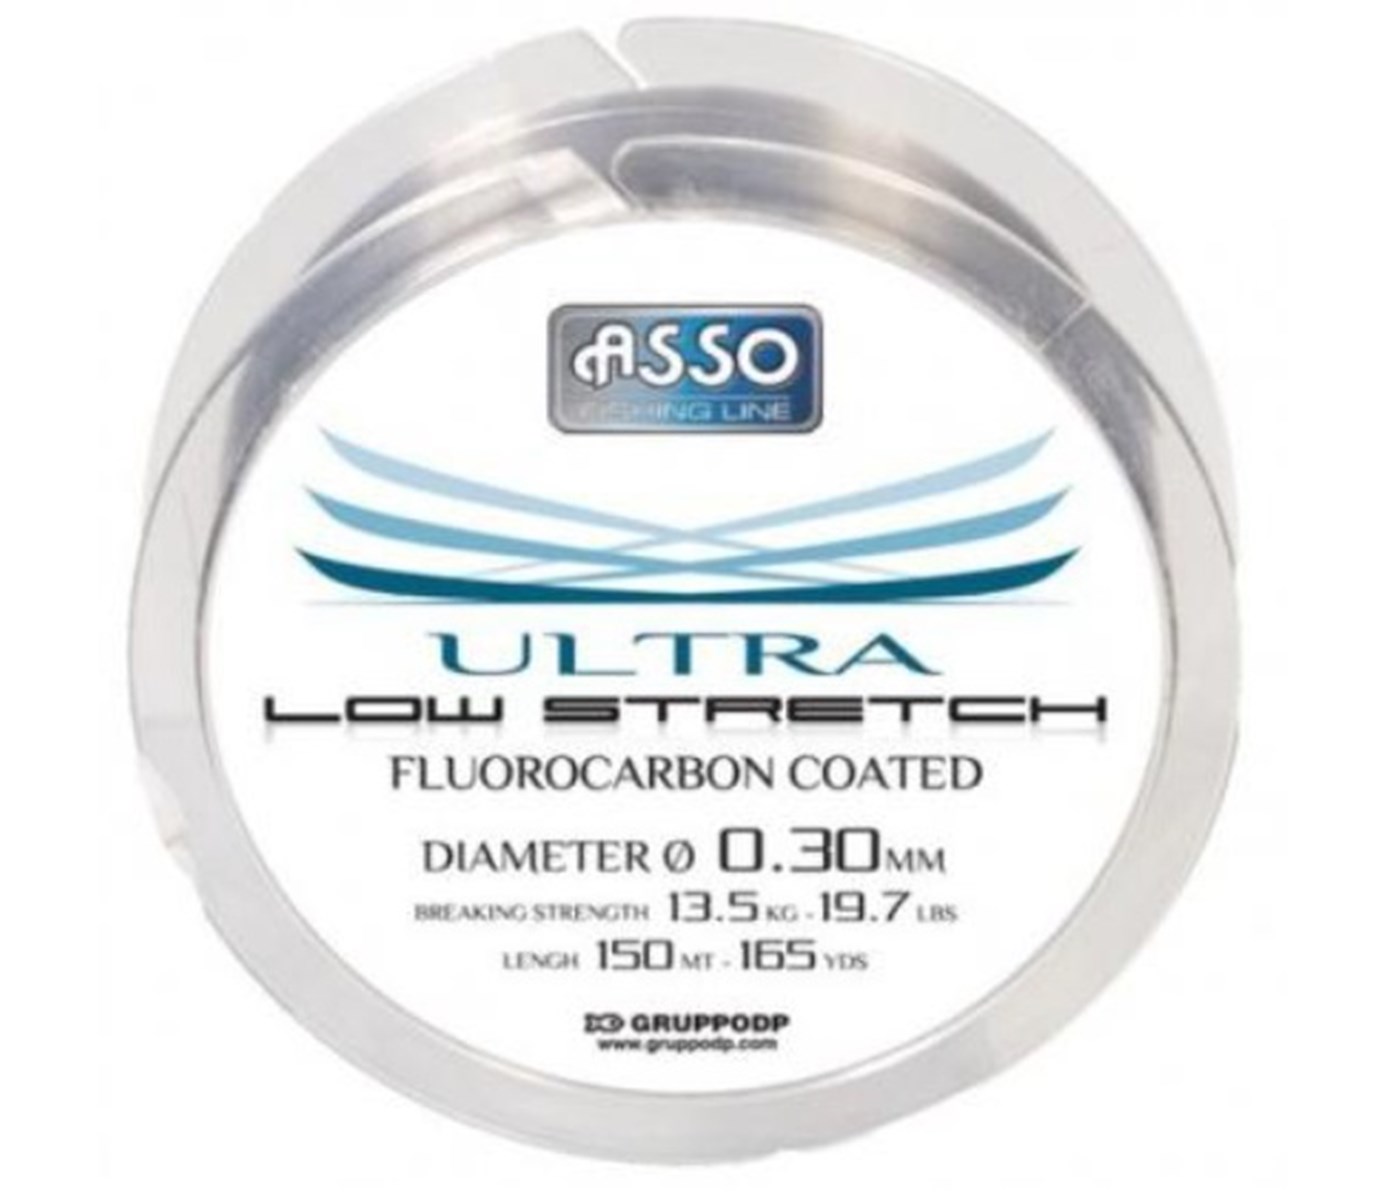 ASSO ULTRA LOW STRETCH FLUOROCARBON COATED 0.40MM